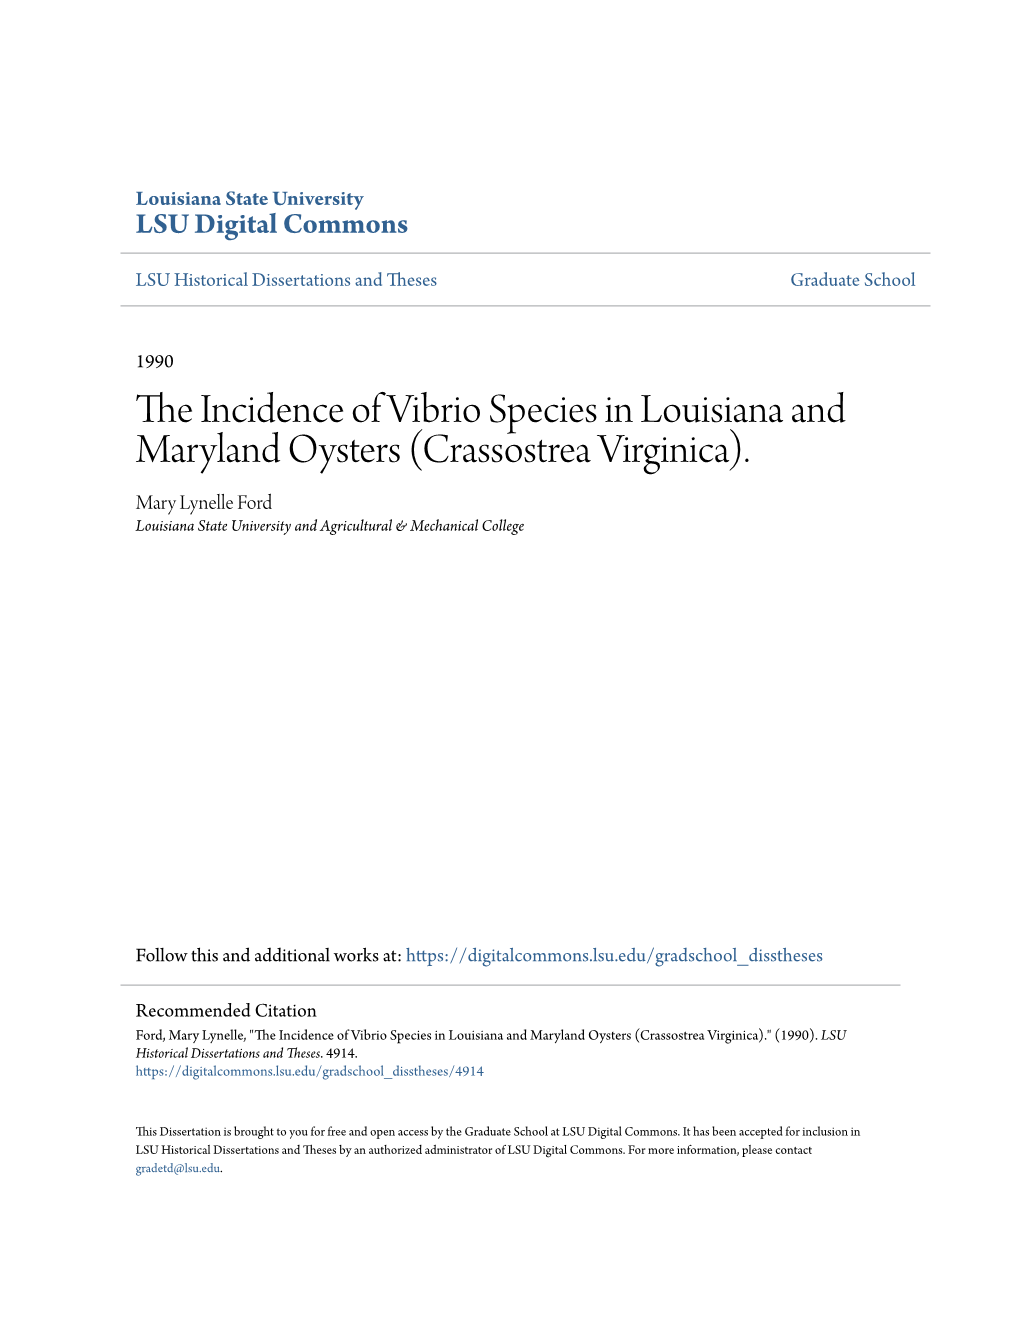 The Incidence of Vibrio Species in Louisiana and Maryland Oysters (Crassostrea Virginica)